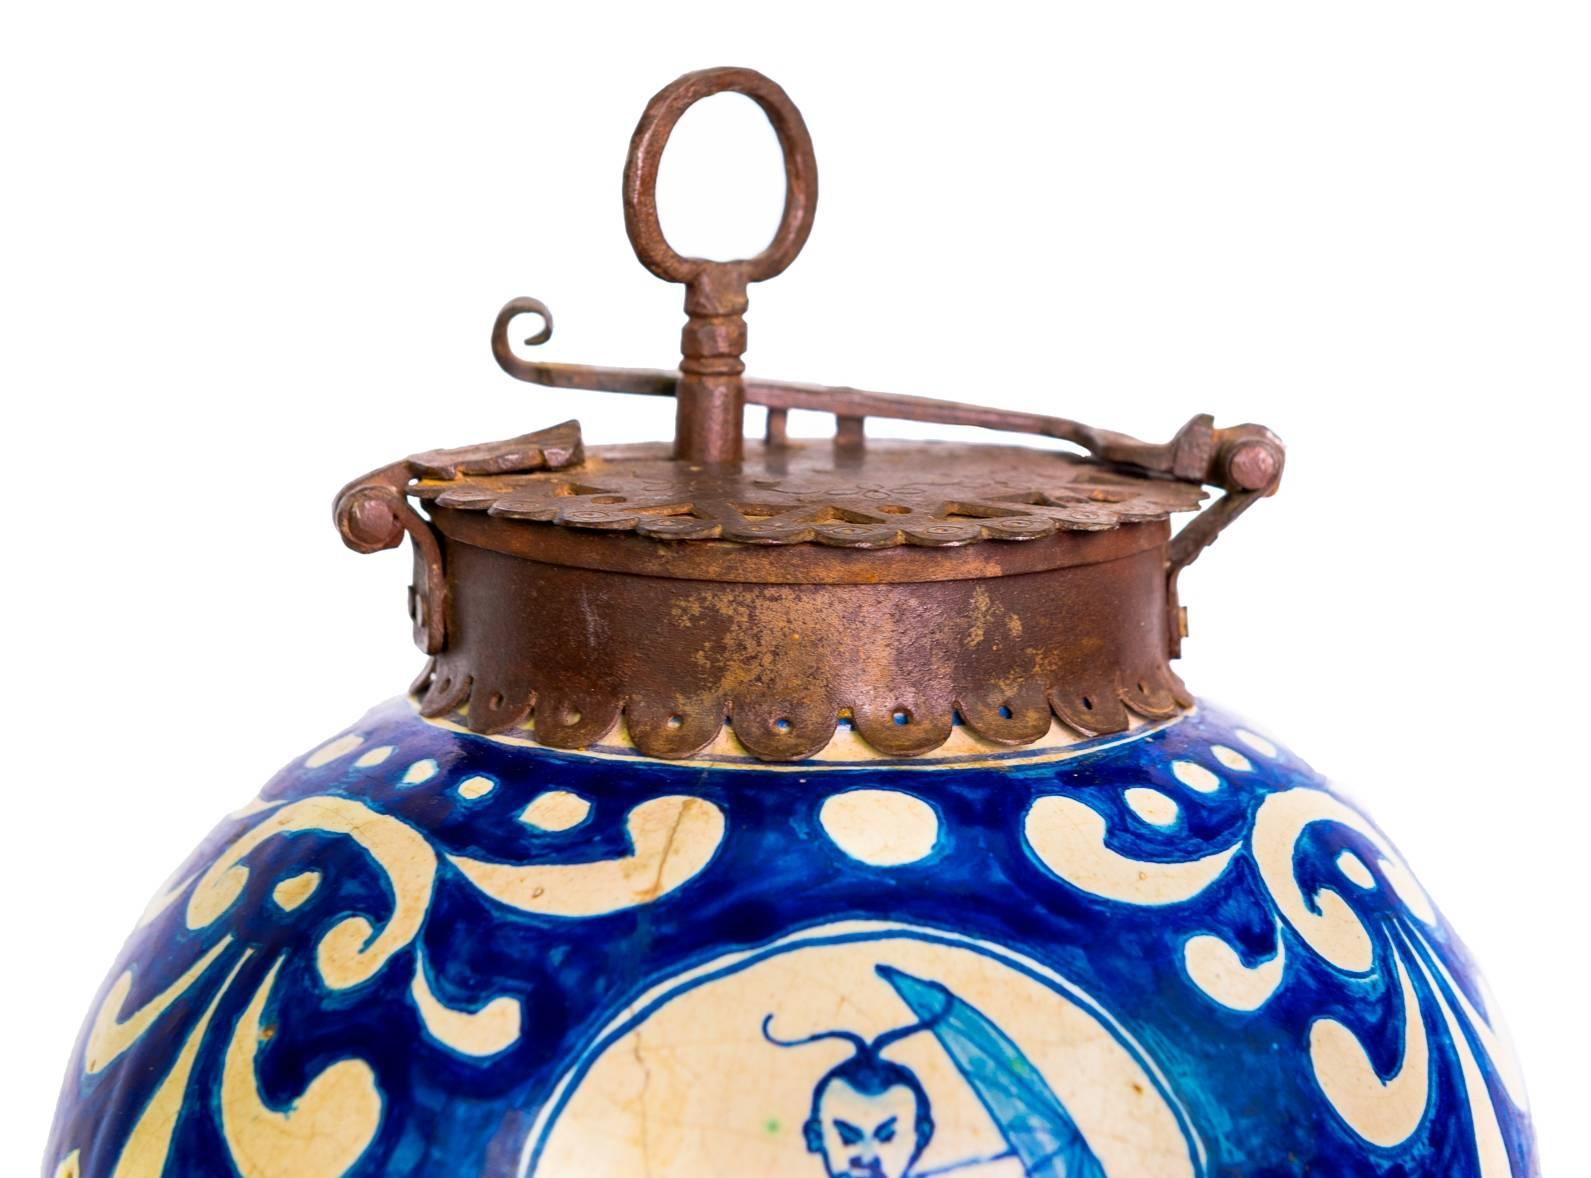 Blue and white chocolate or spice jar made in Puebla Mexico and has Chinese motif examples of the Asian influence in the Americas which was conducted through the trade route that existed from Acapulco Bay to Manila Bay from 1680-1820.
This